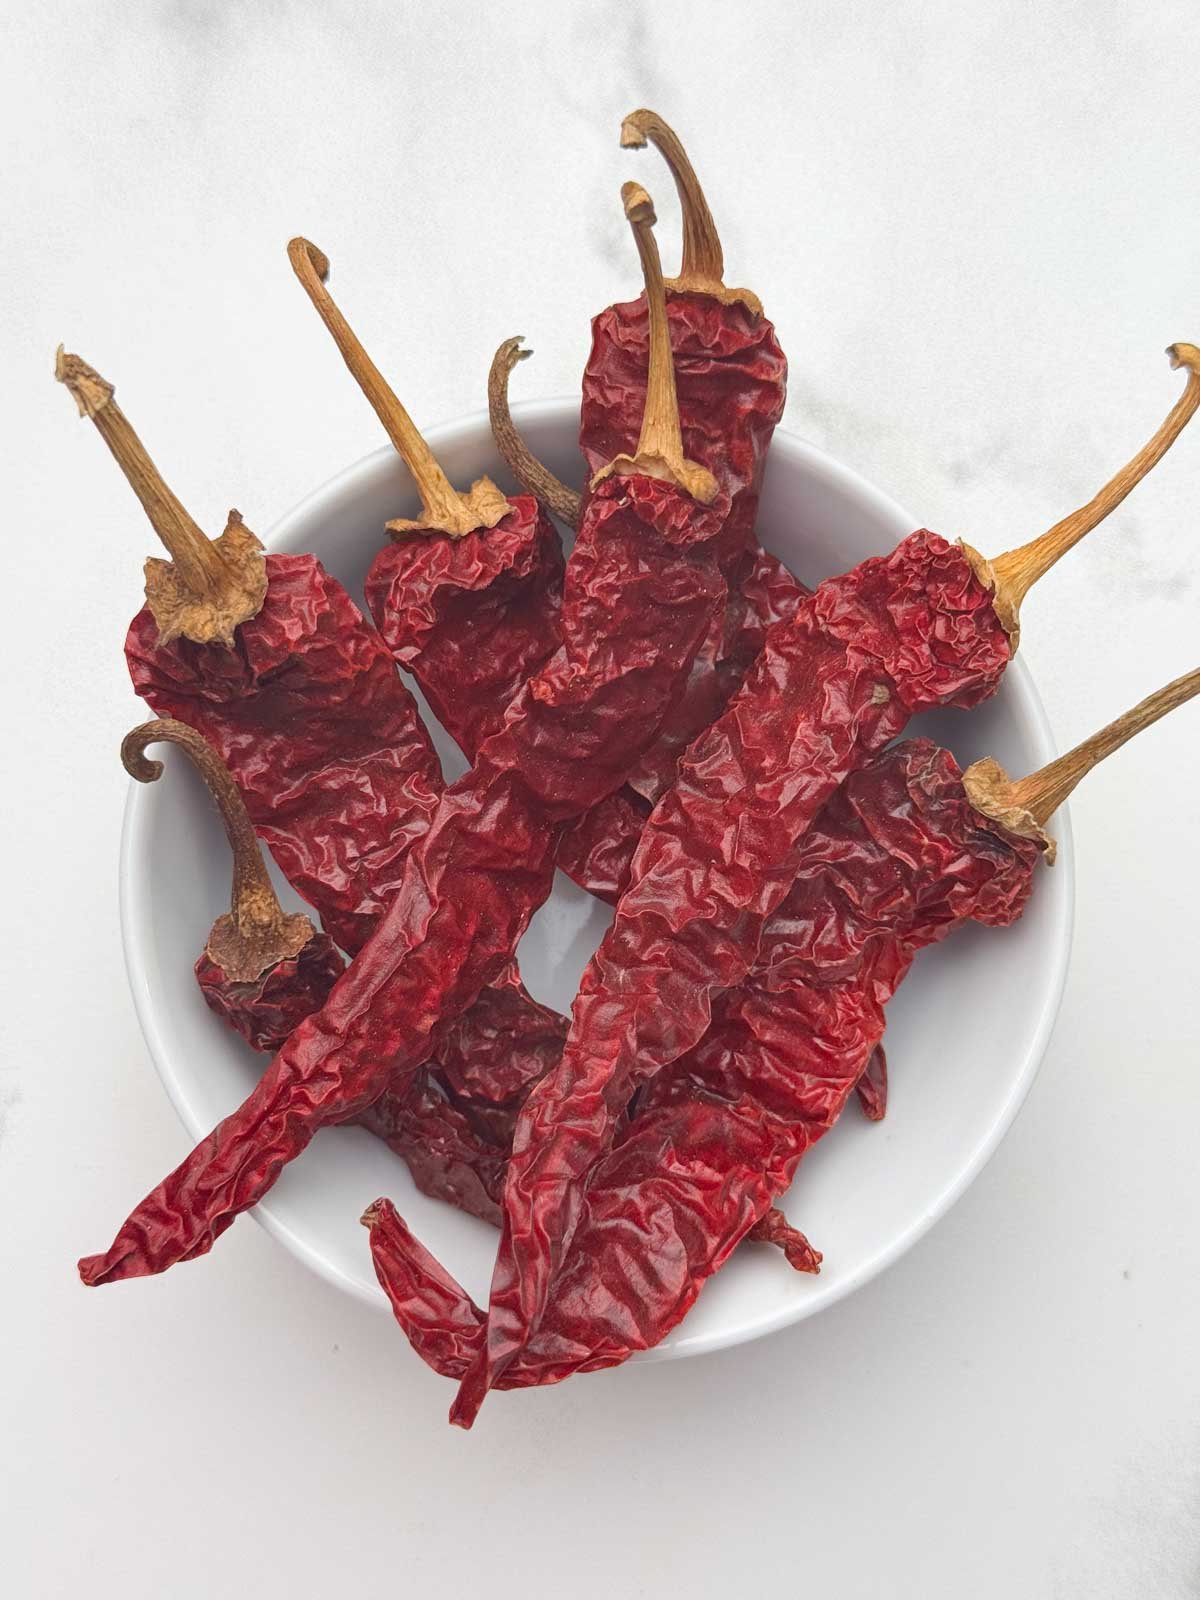 dried red chilies in a bowl